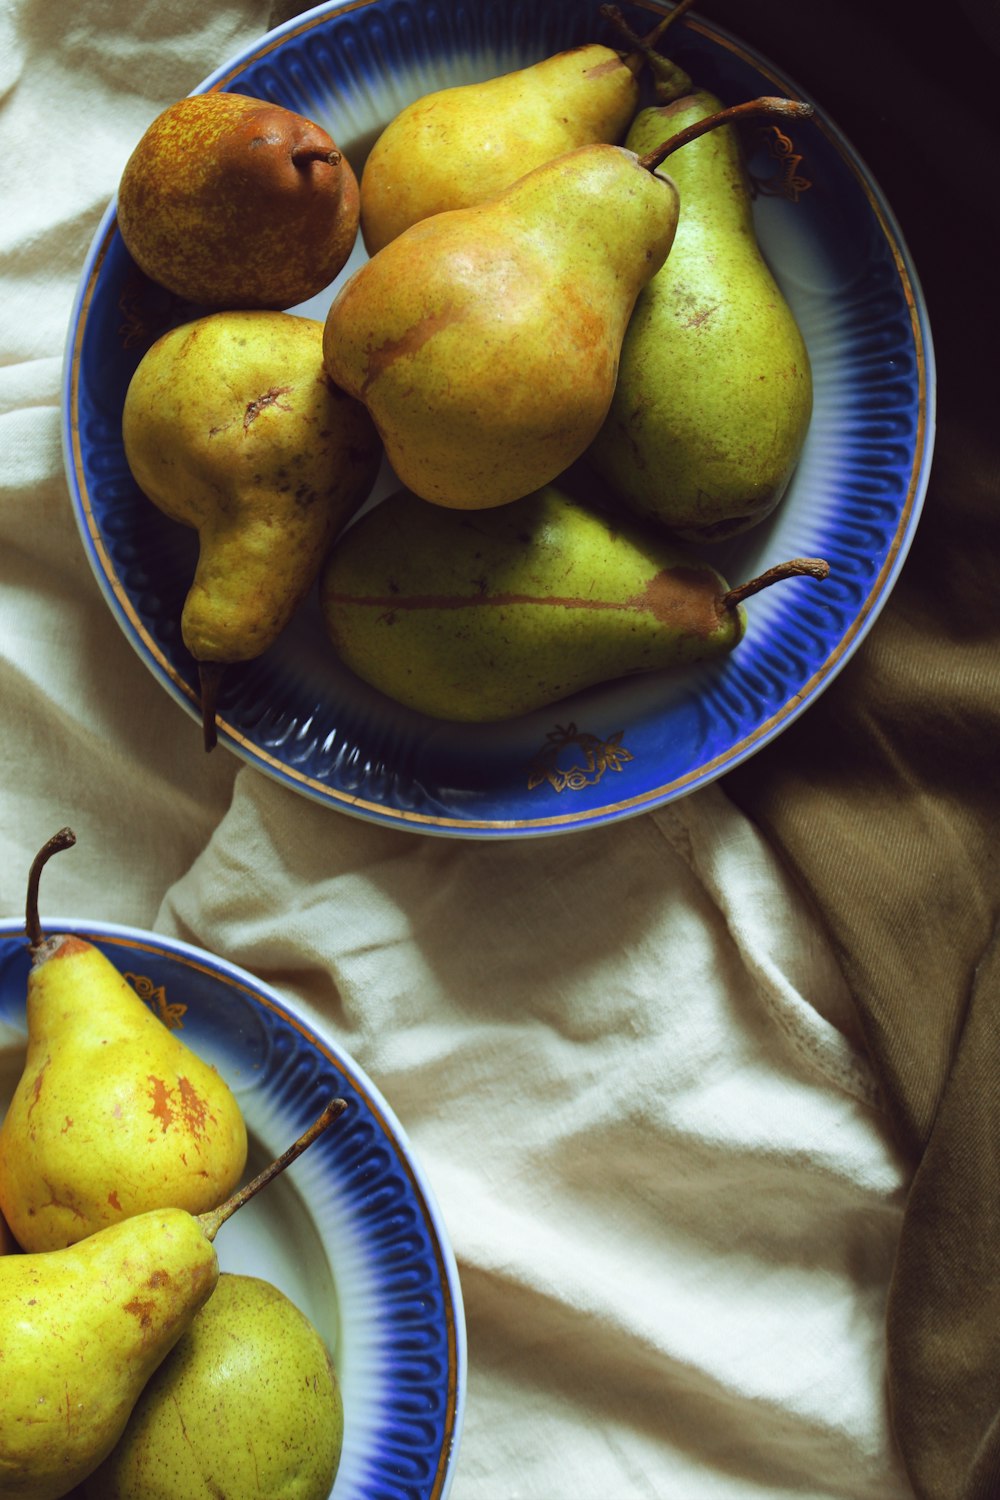 pears fruits on plates